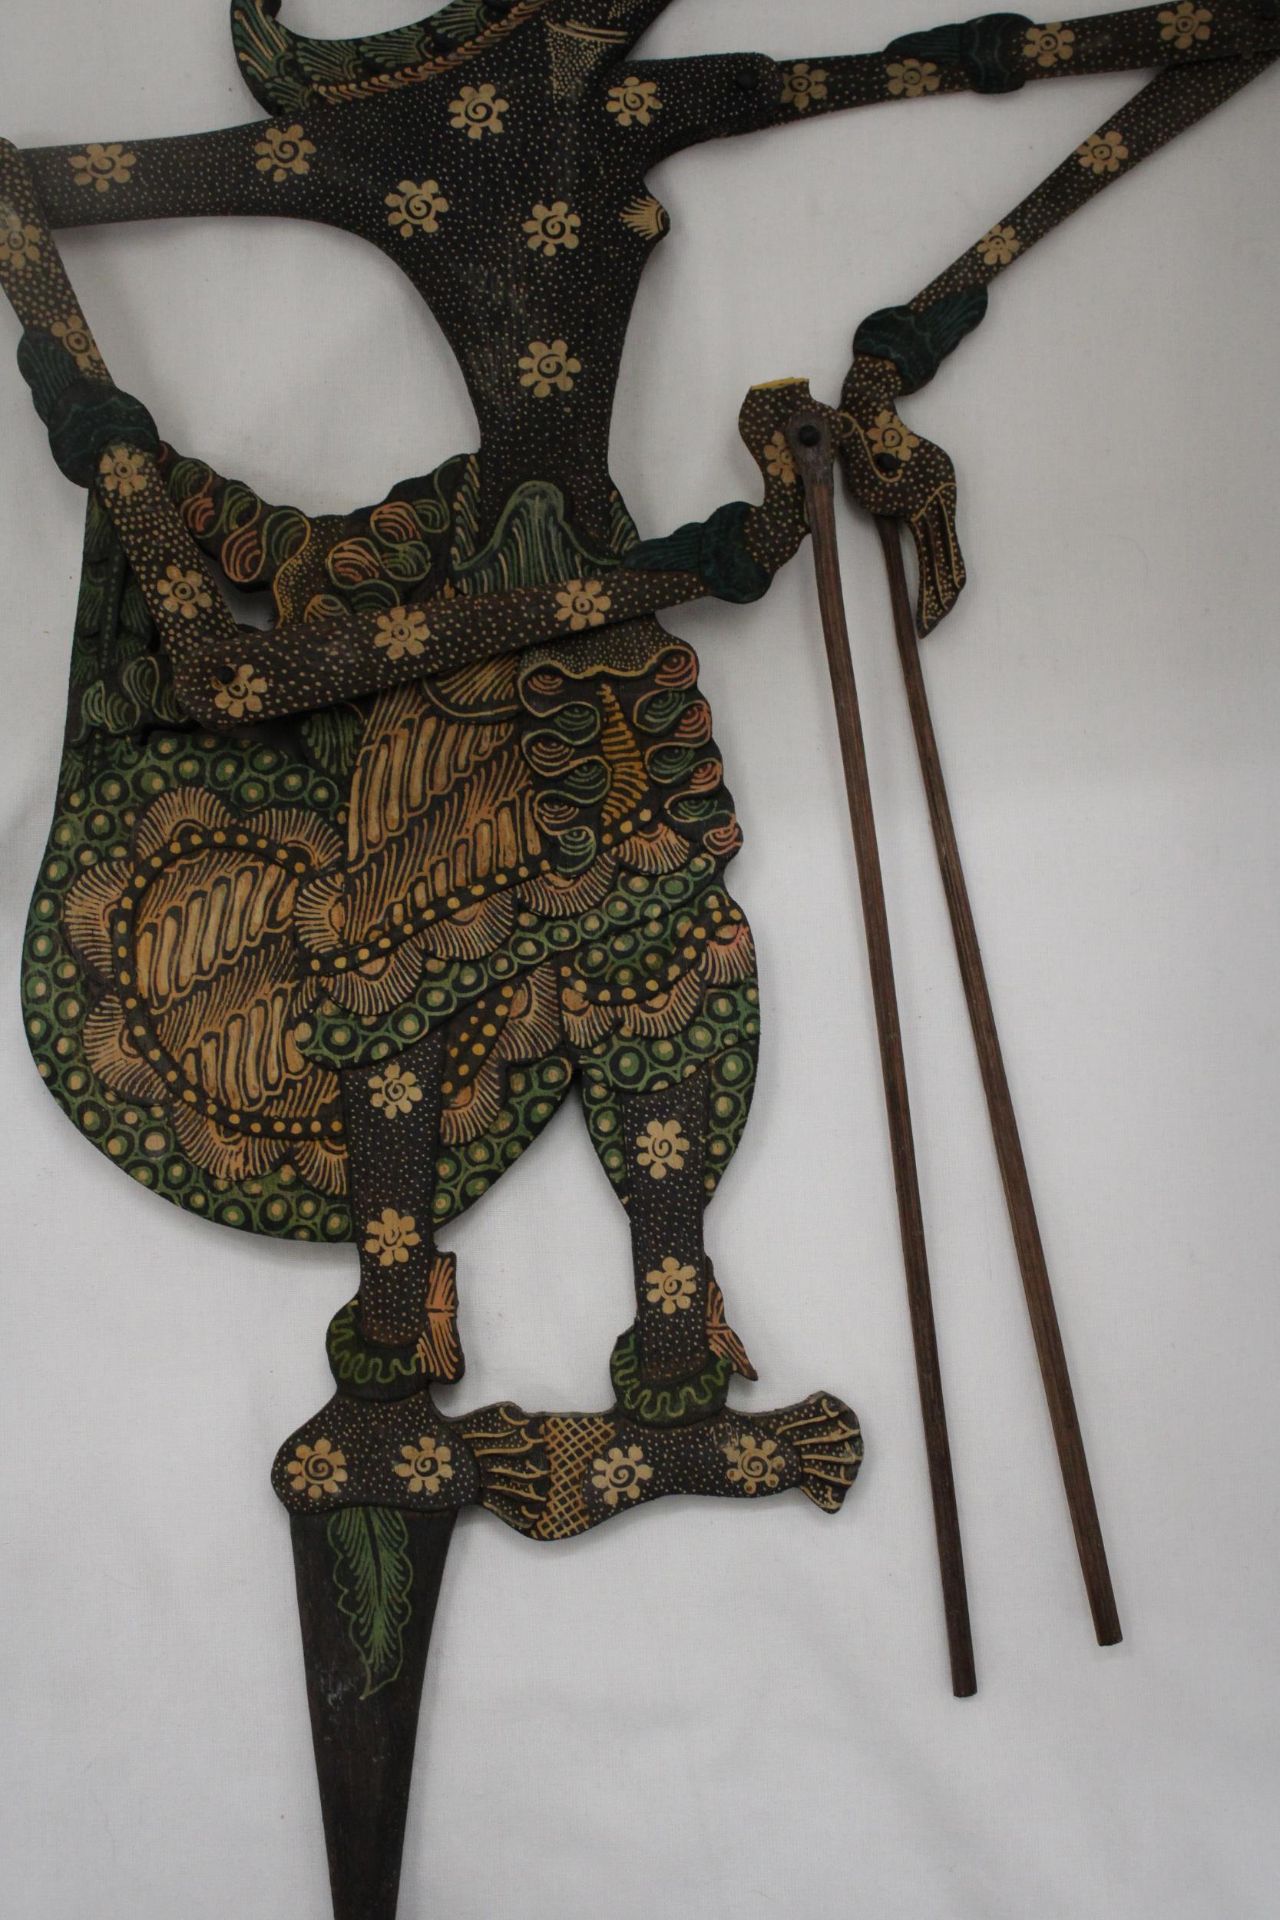 TWO ASIAN STYLE MARIONETTE STICK PUPPETS - Image 5 of 7